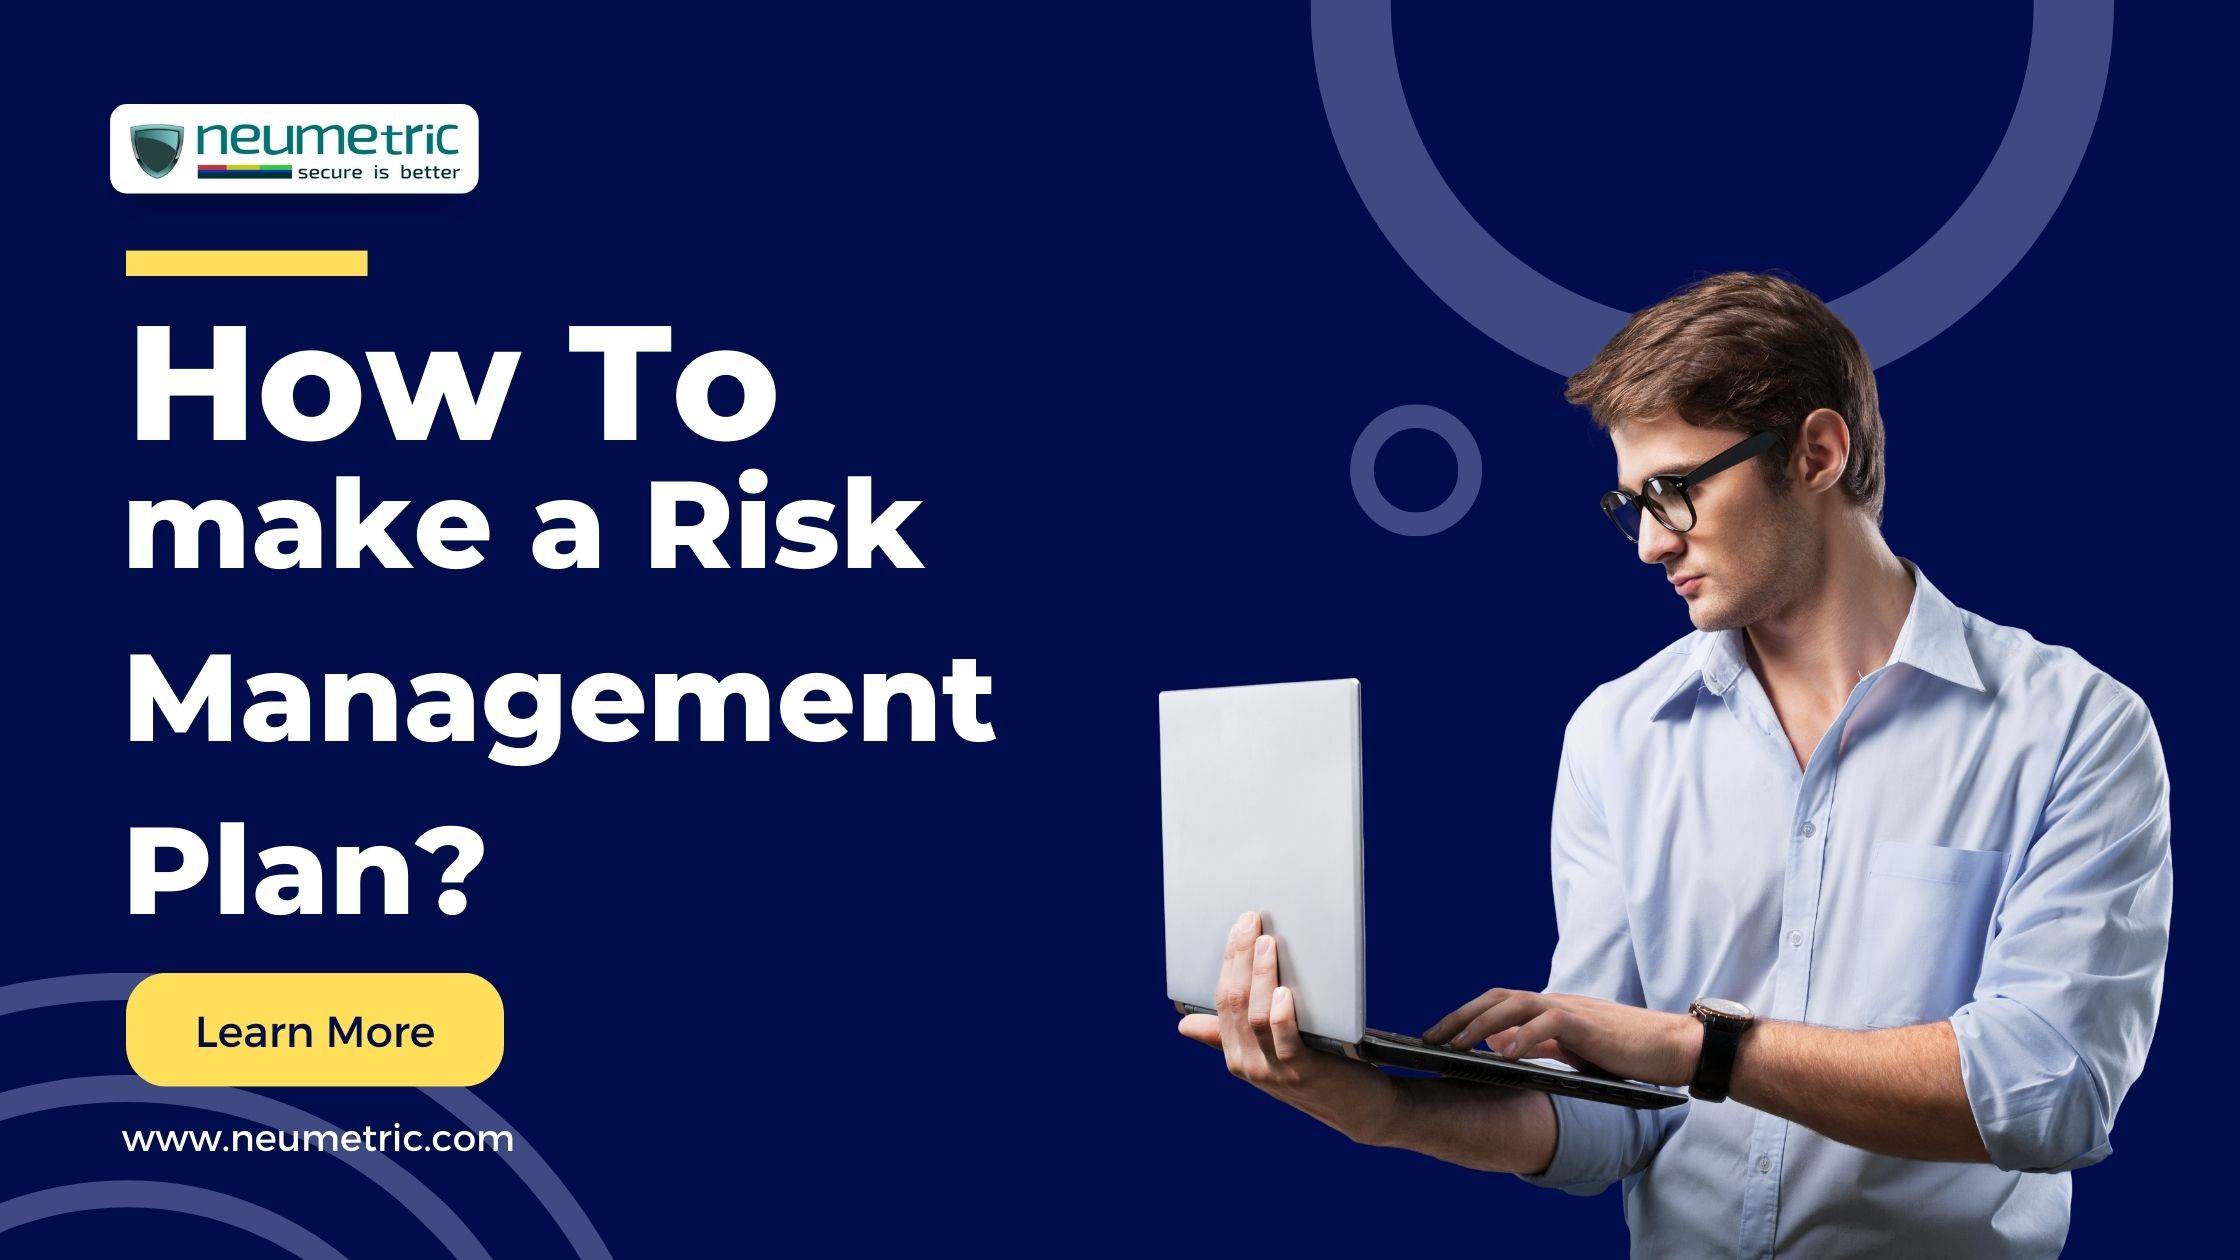 How to make a Risk Management Plan?